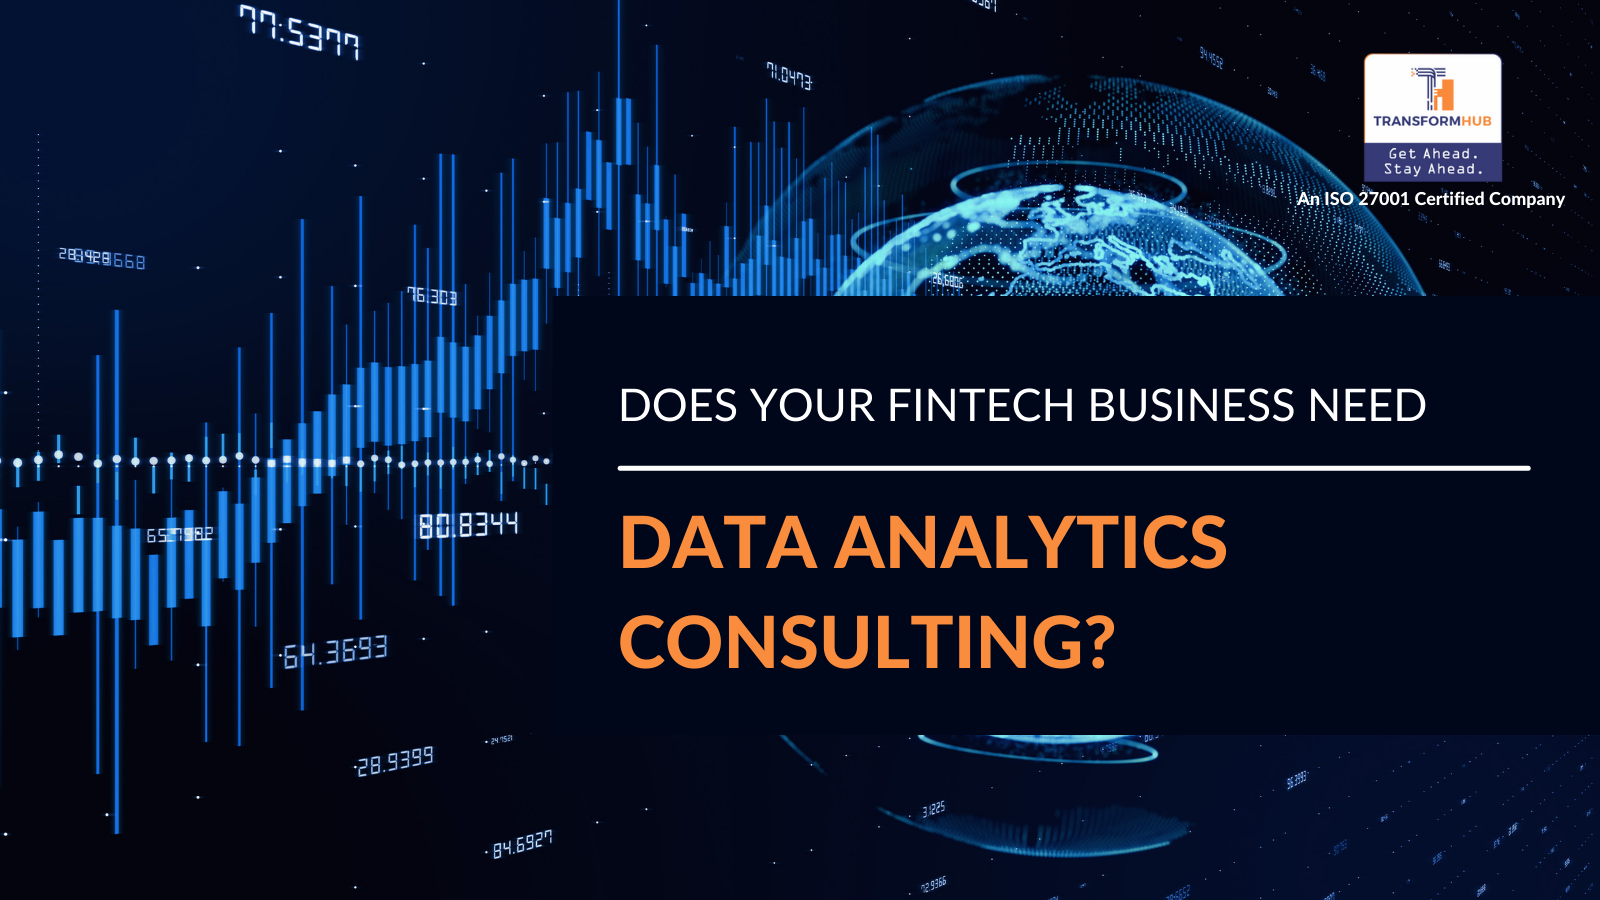 Does%20your%20FinTech%20Business%20Need%20Data%20Analytics%20Consulting%3F%20.png